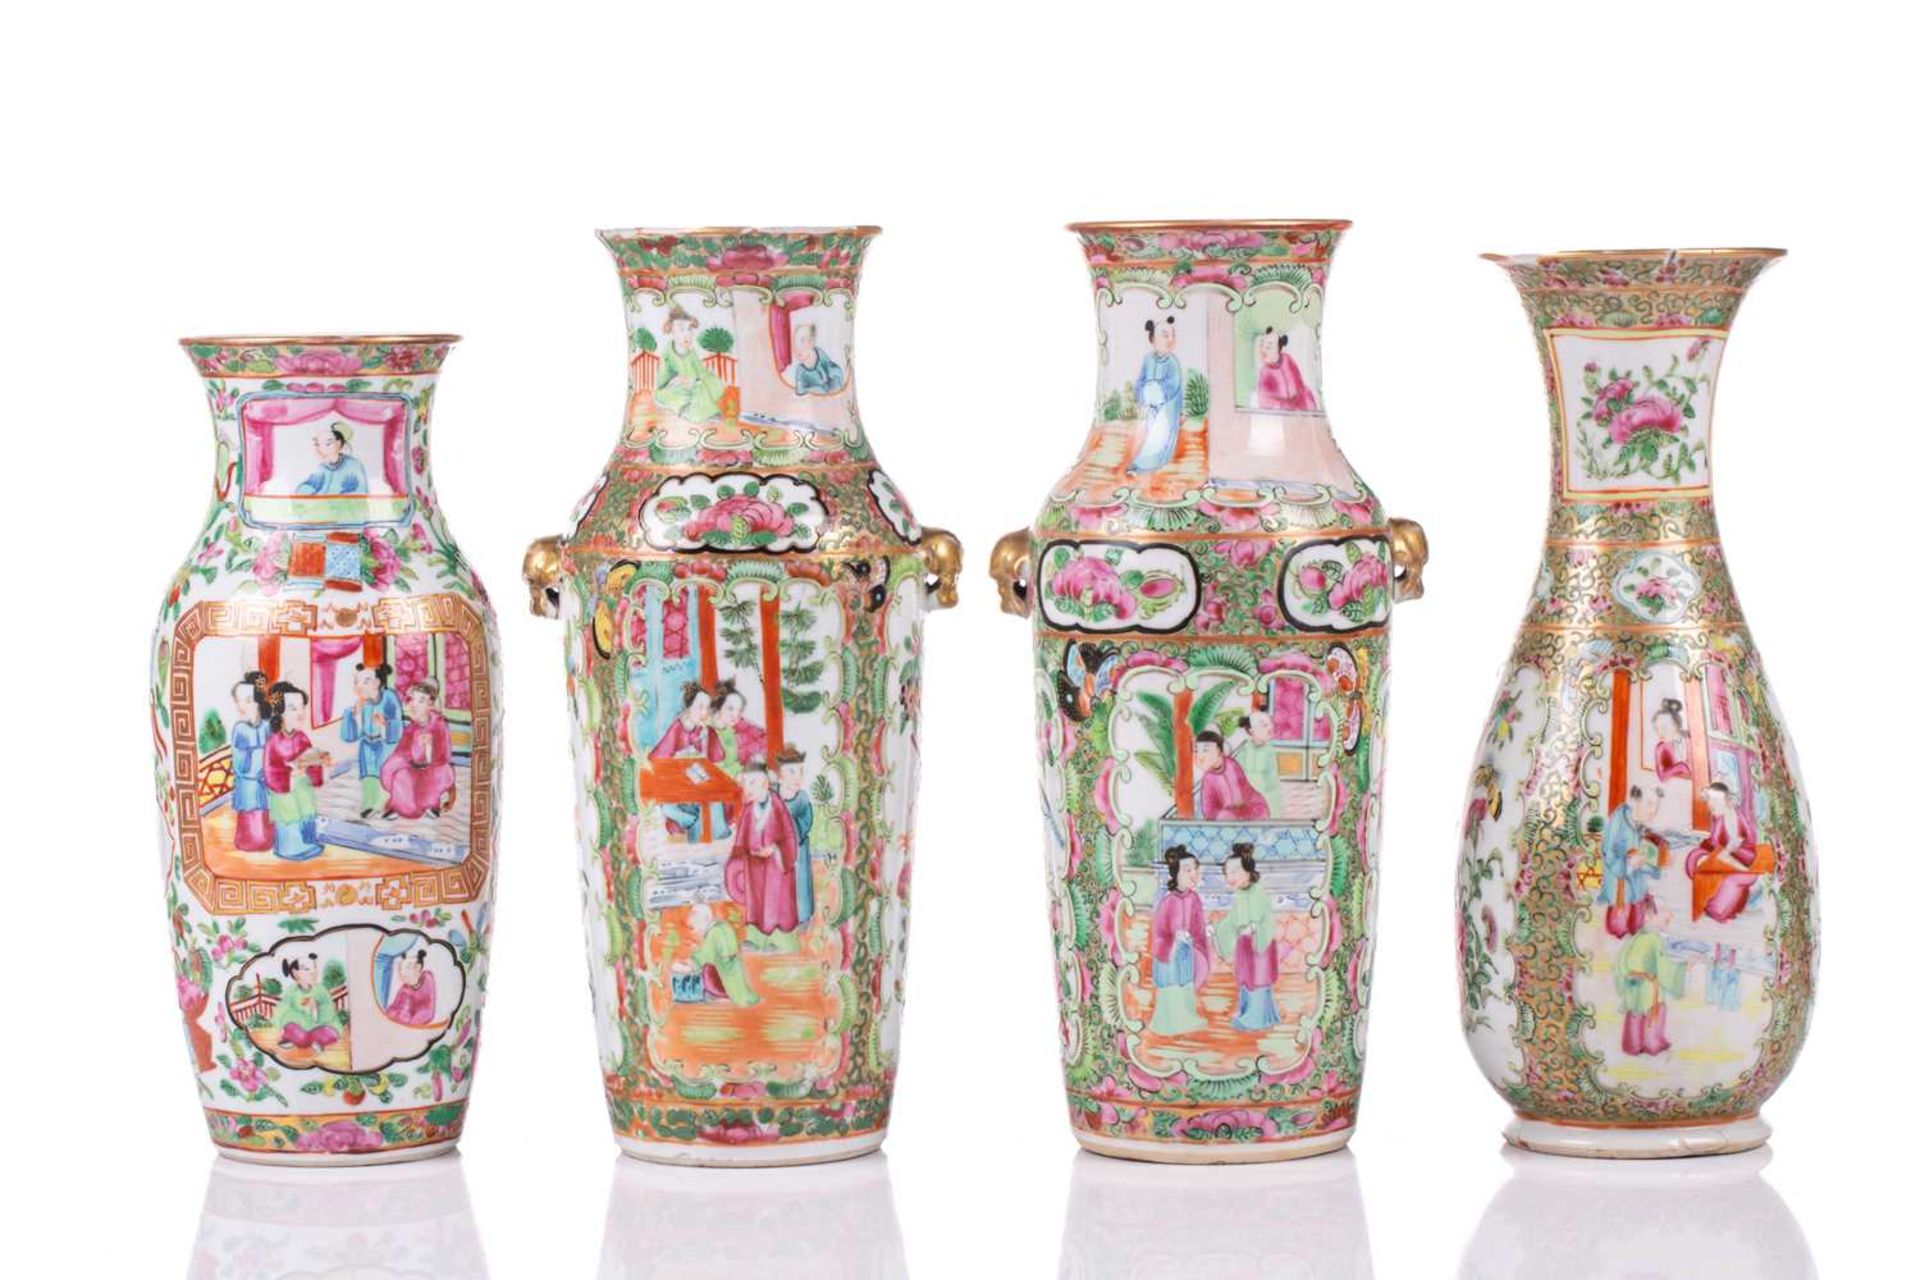 A pair of Chinese Canton enamel vases, circa 1860/1870, painted with alternating panels of